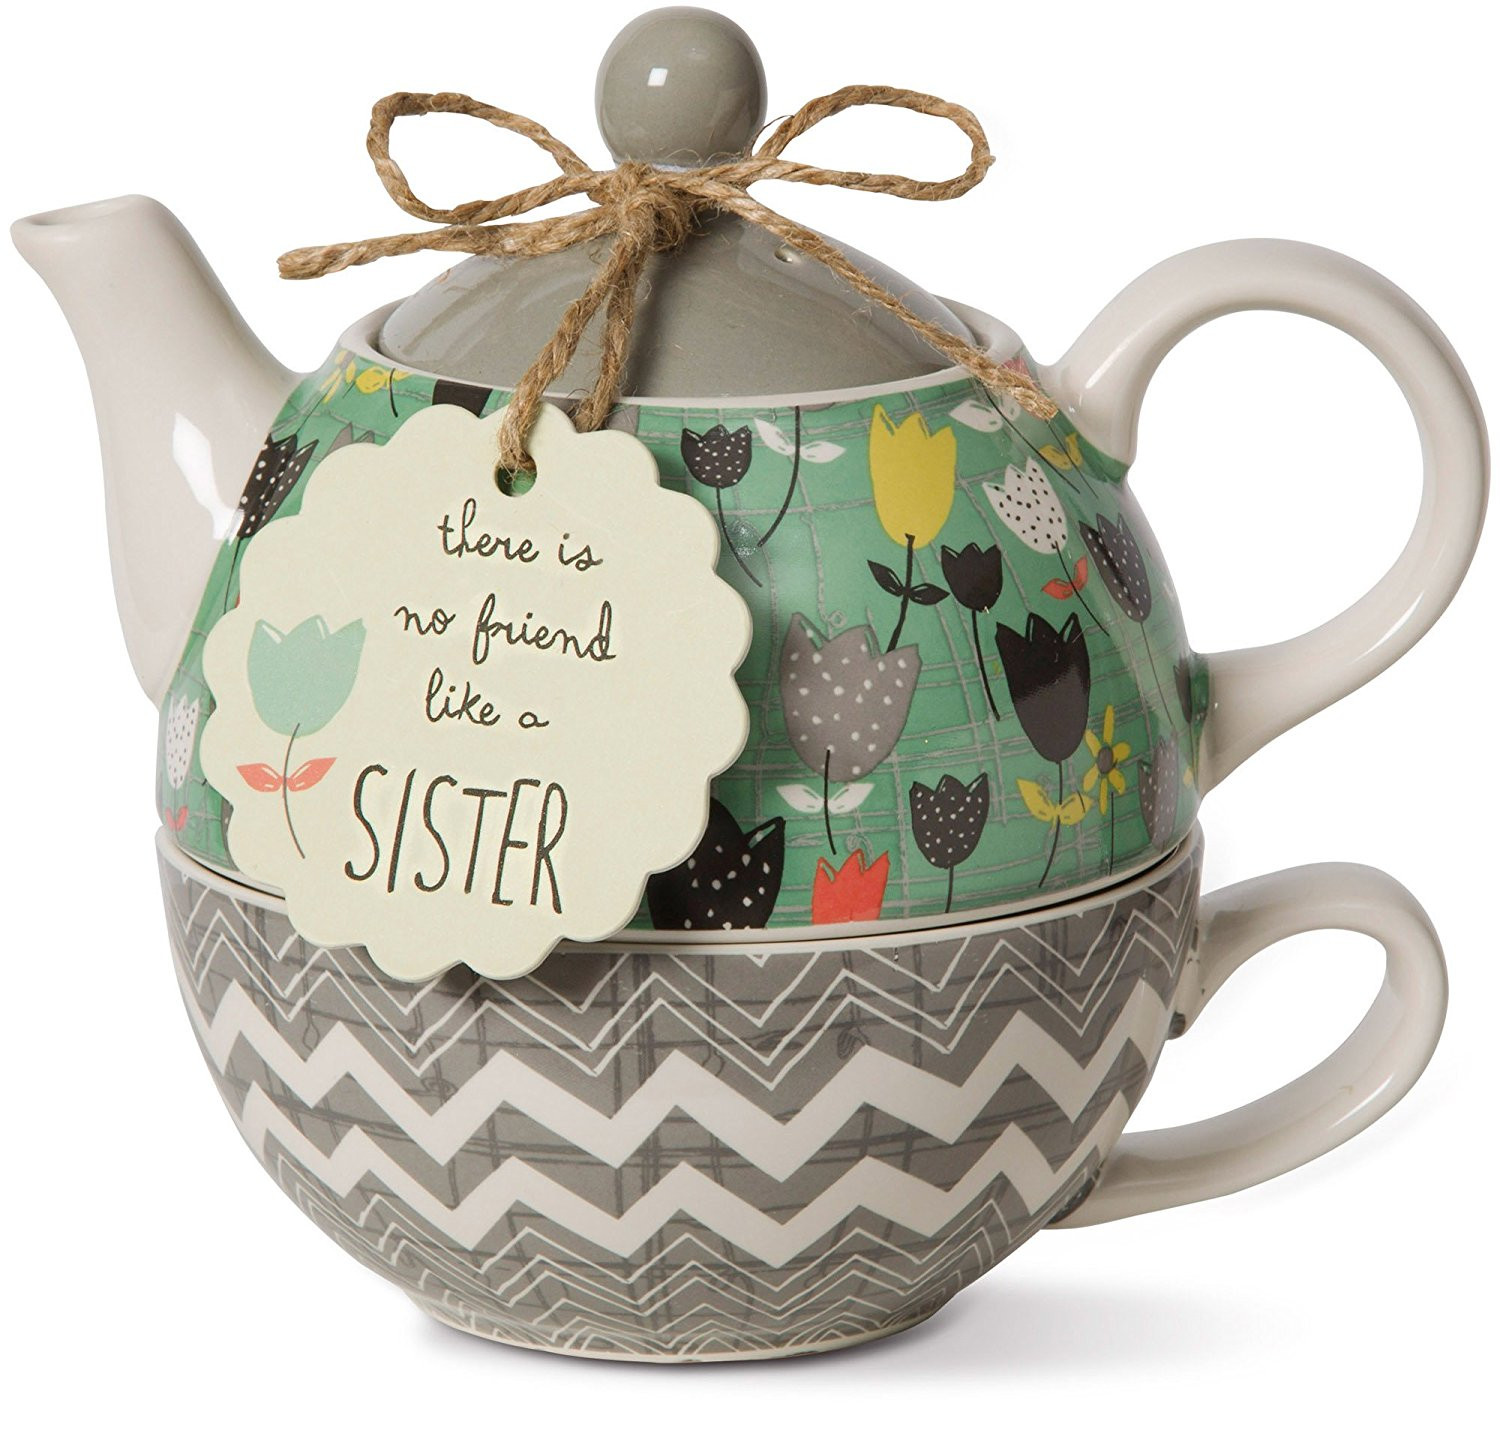 Gift Ideas For Sister Christmas
 105 Perfect Birthday Gift Ideas for Sister